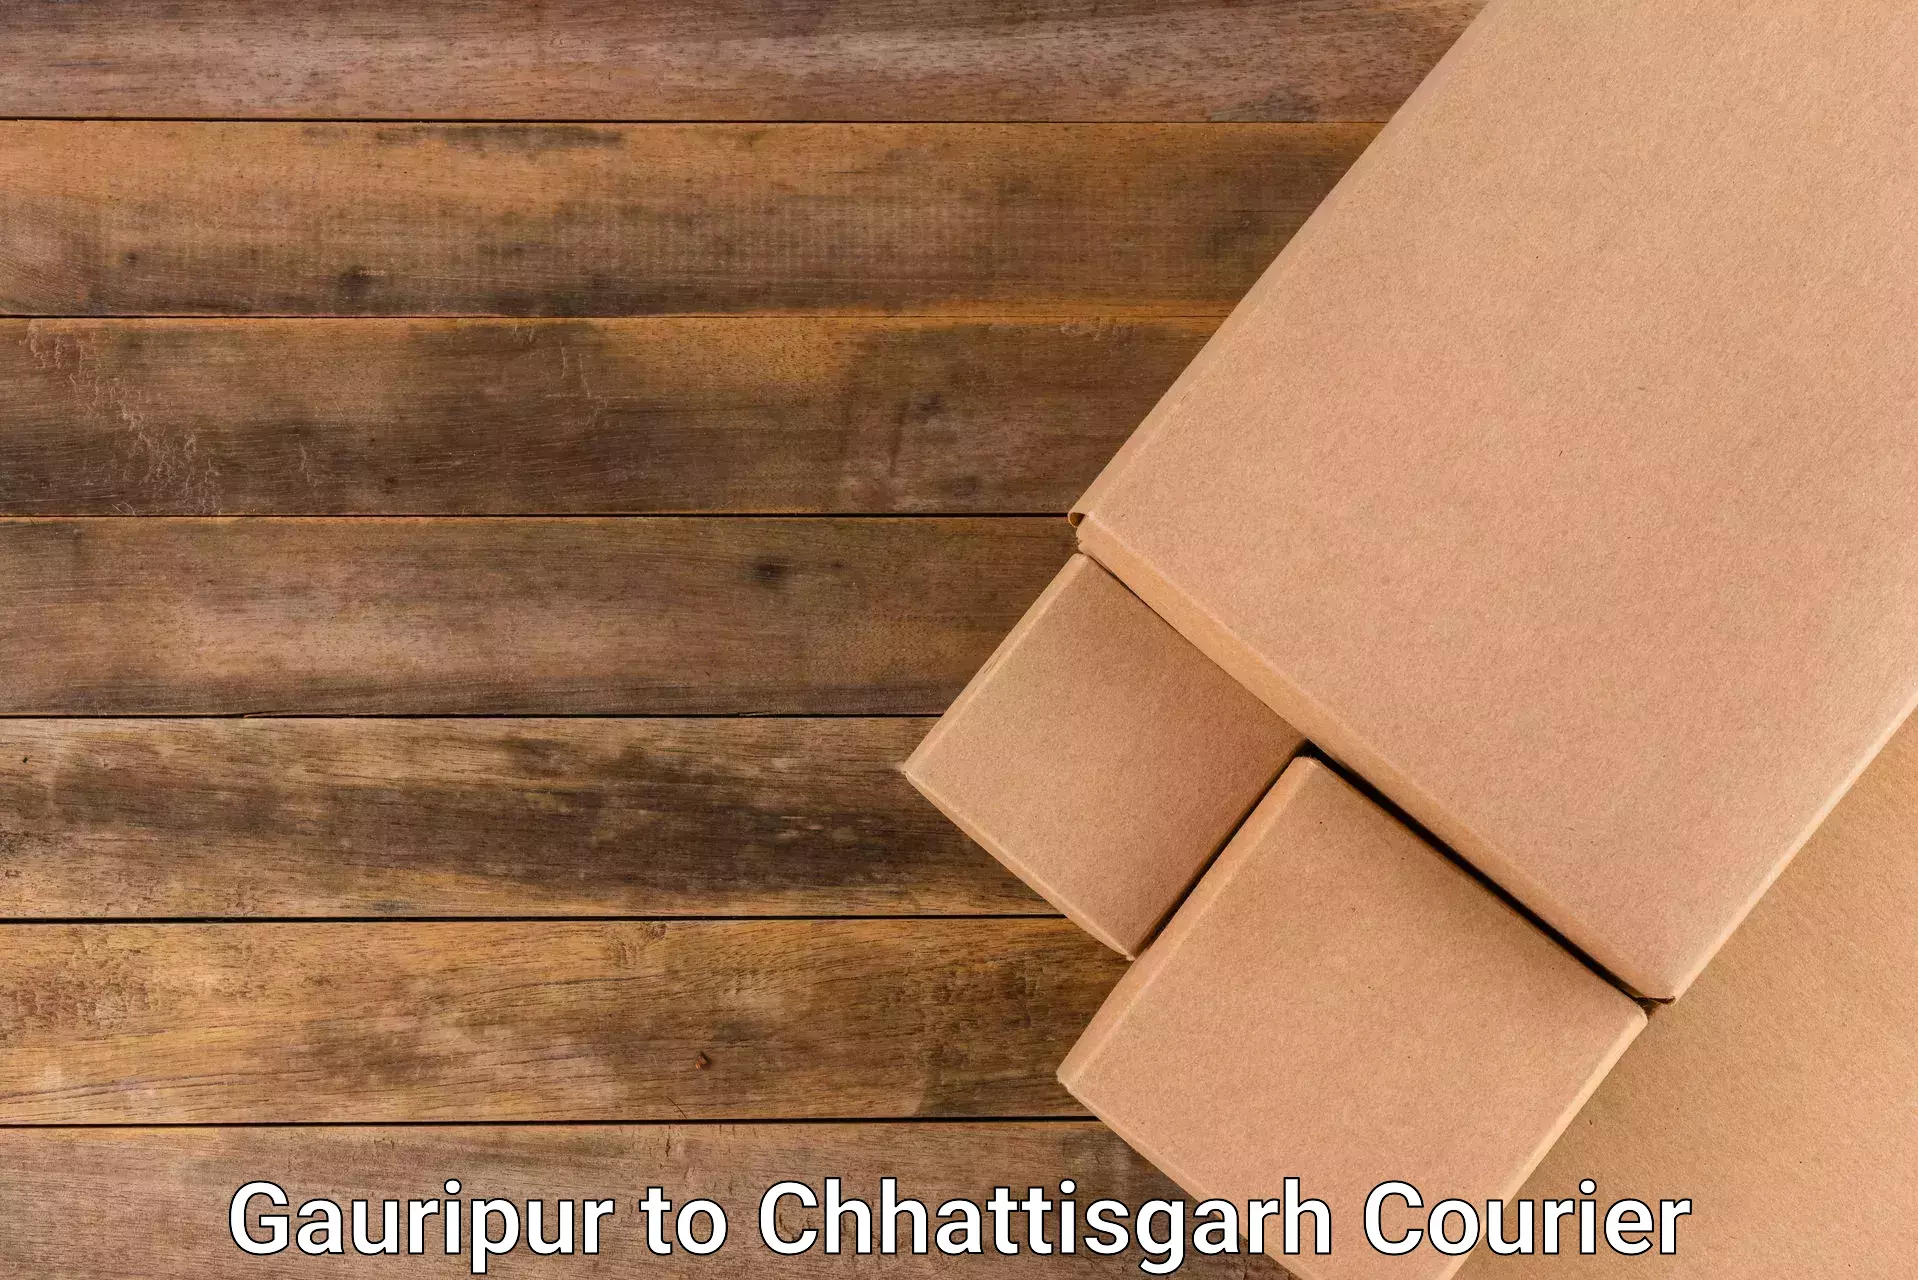 End-to-end delivery Gauripur to Ratanpur